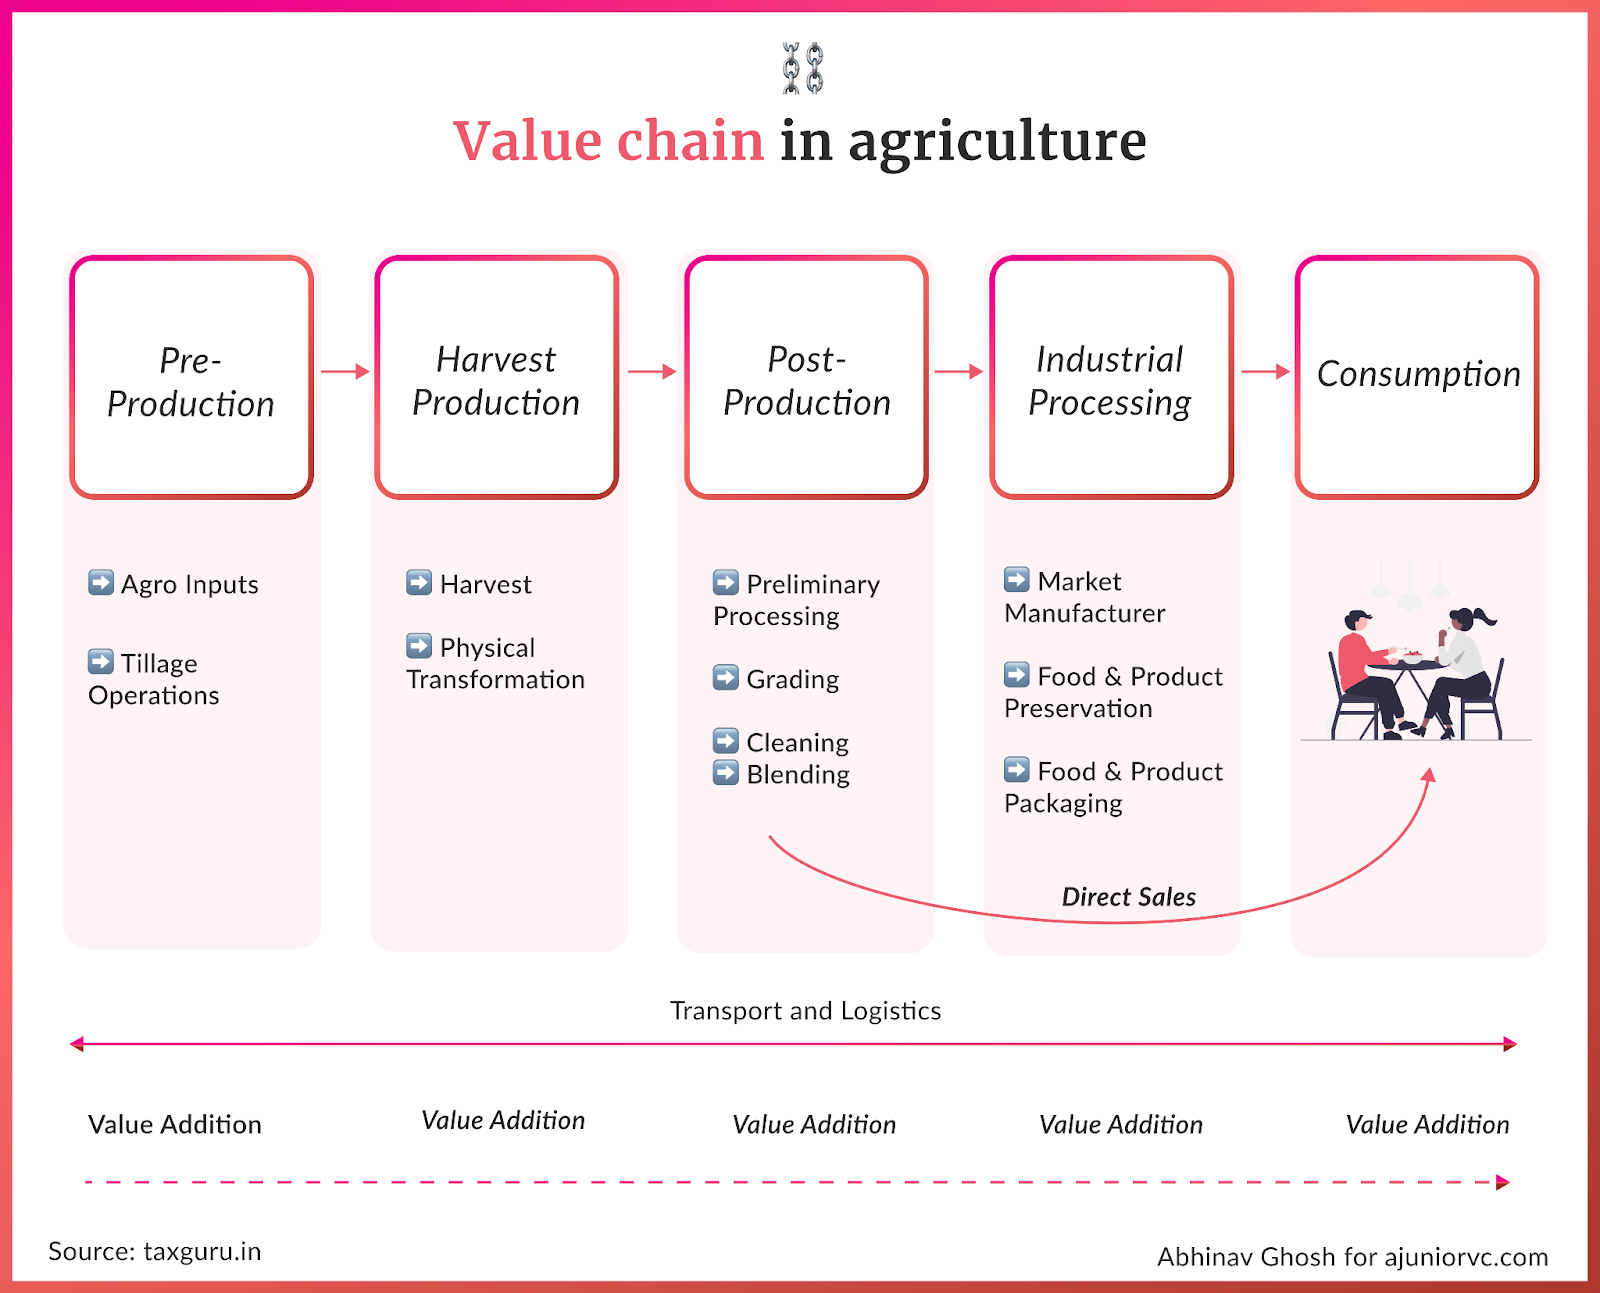 How value is added in agriculture